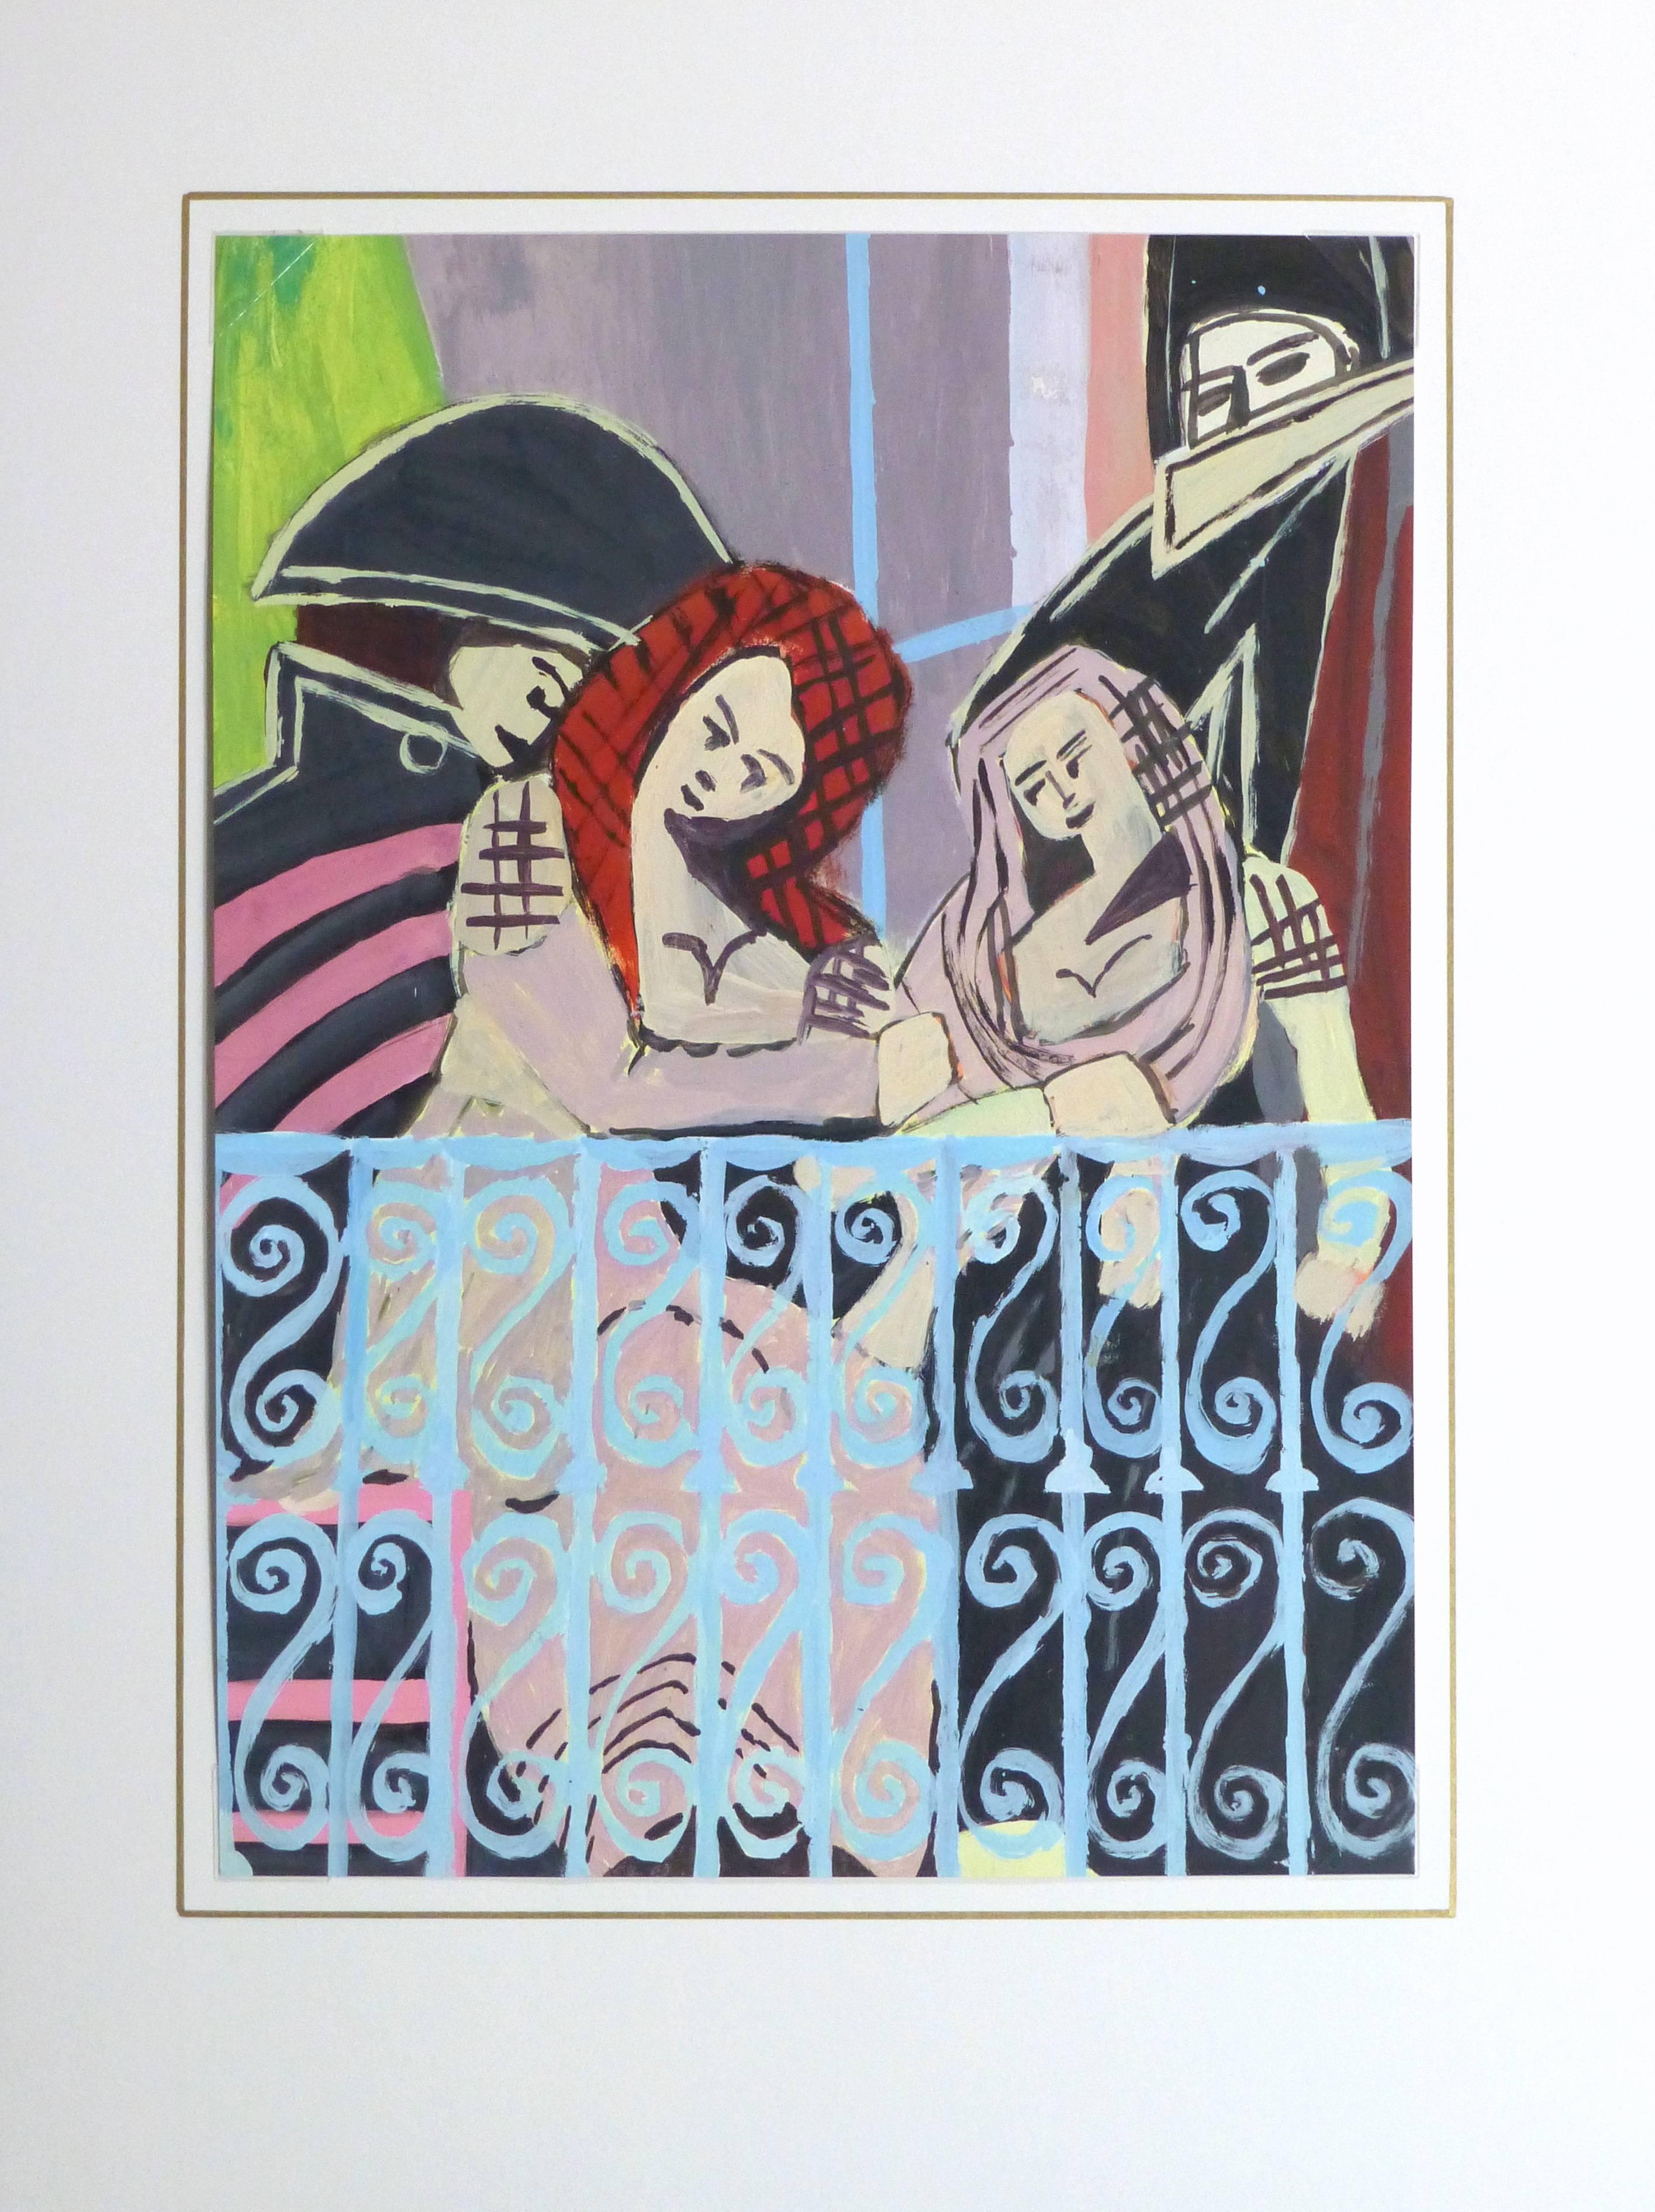 Mid-centruy French painting of figures on a balcony dressed in Shakespearean era finery by A. Vivent, circa 1960. 

Original artwork on paper displayed on a white mat with a gold border. Archival plastic sleeve and Certificate of Authenticity